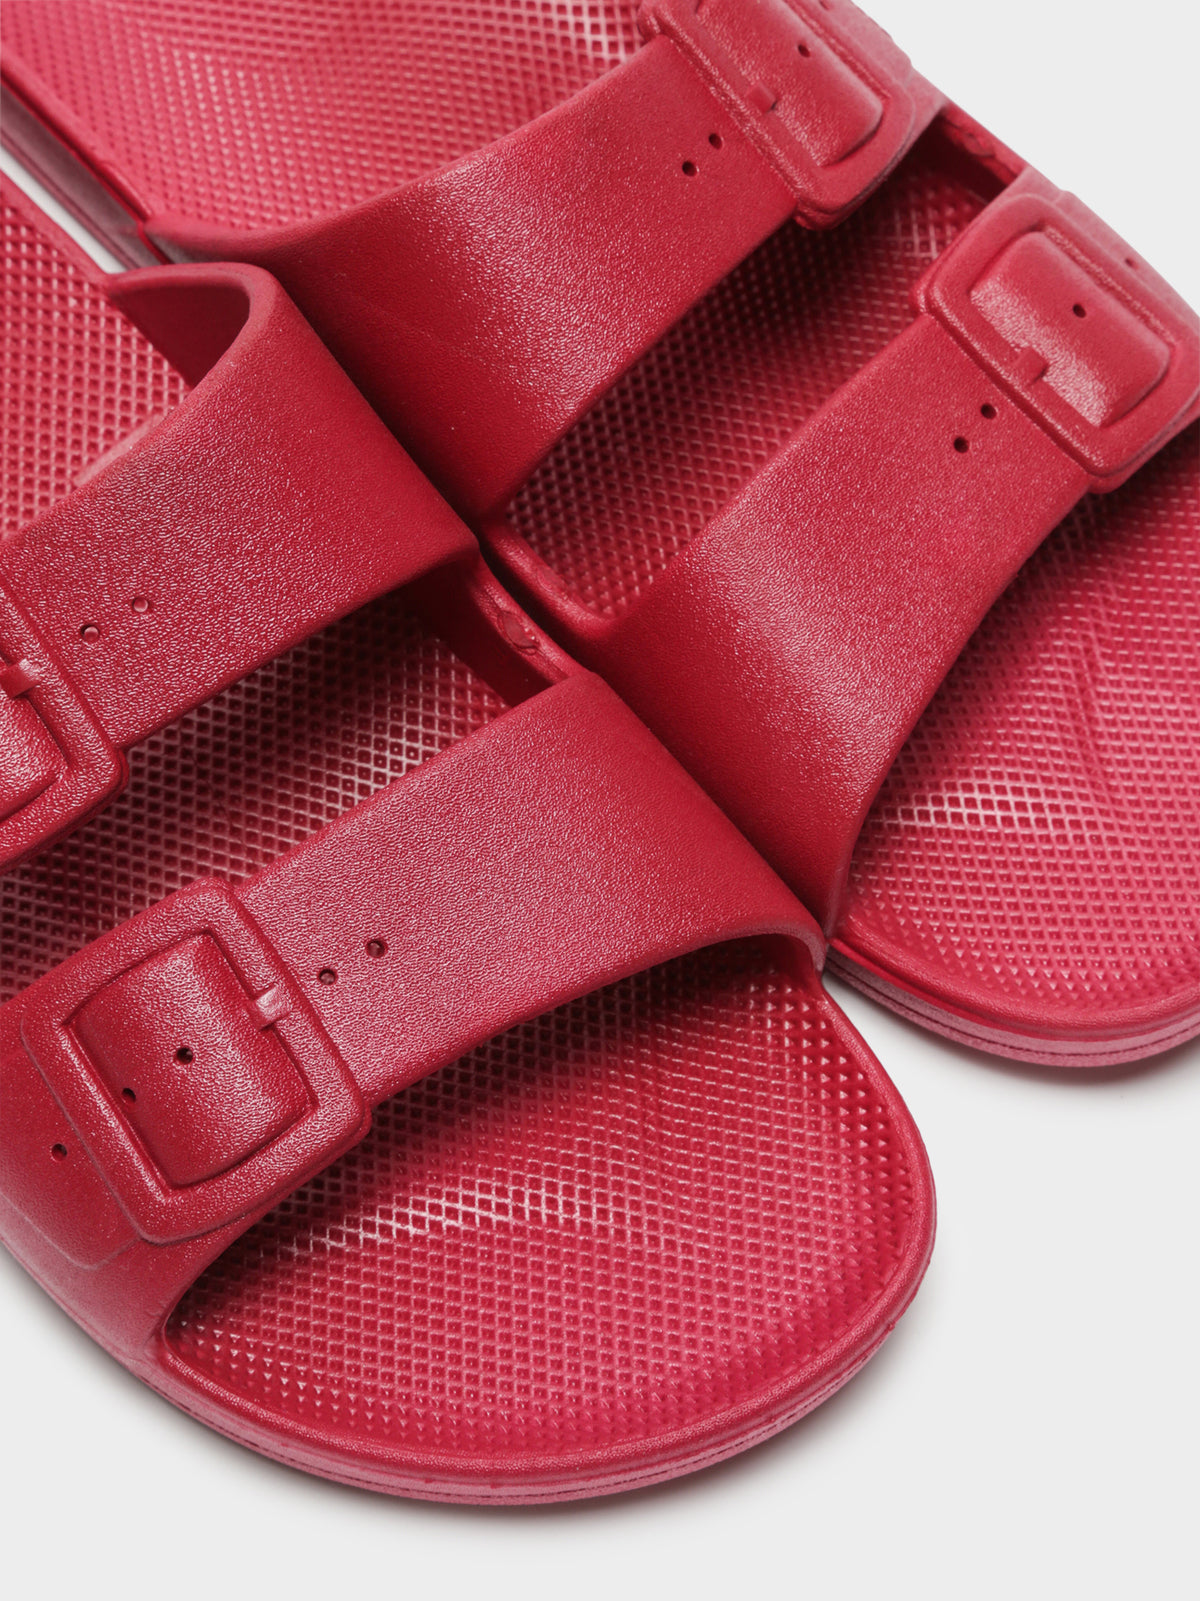 Womens Freedom Moses Slides in Cherry Bomb